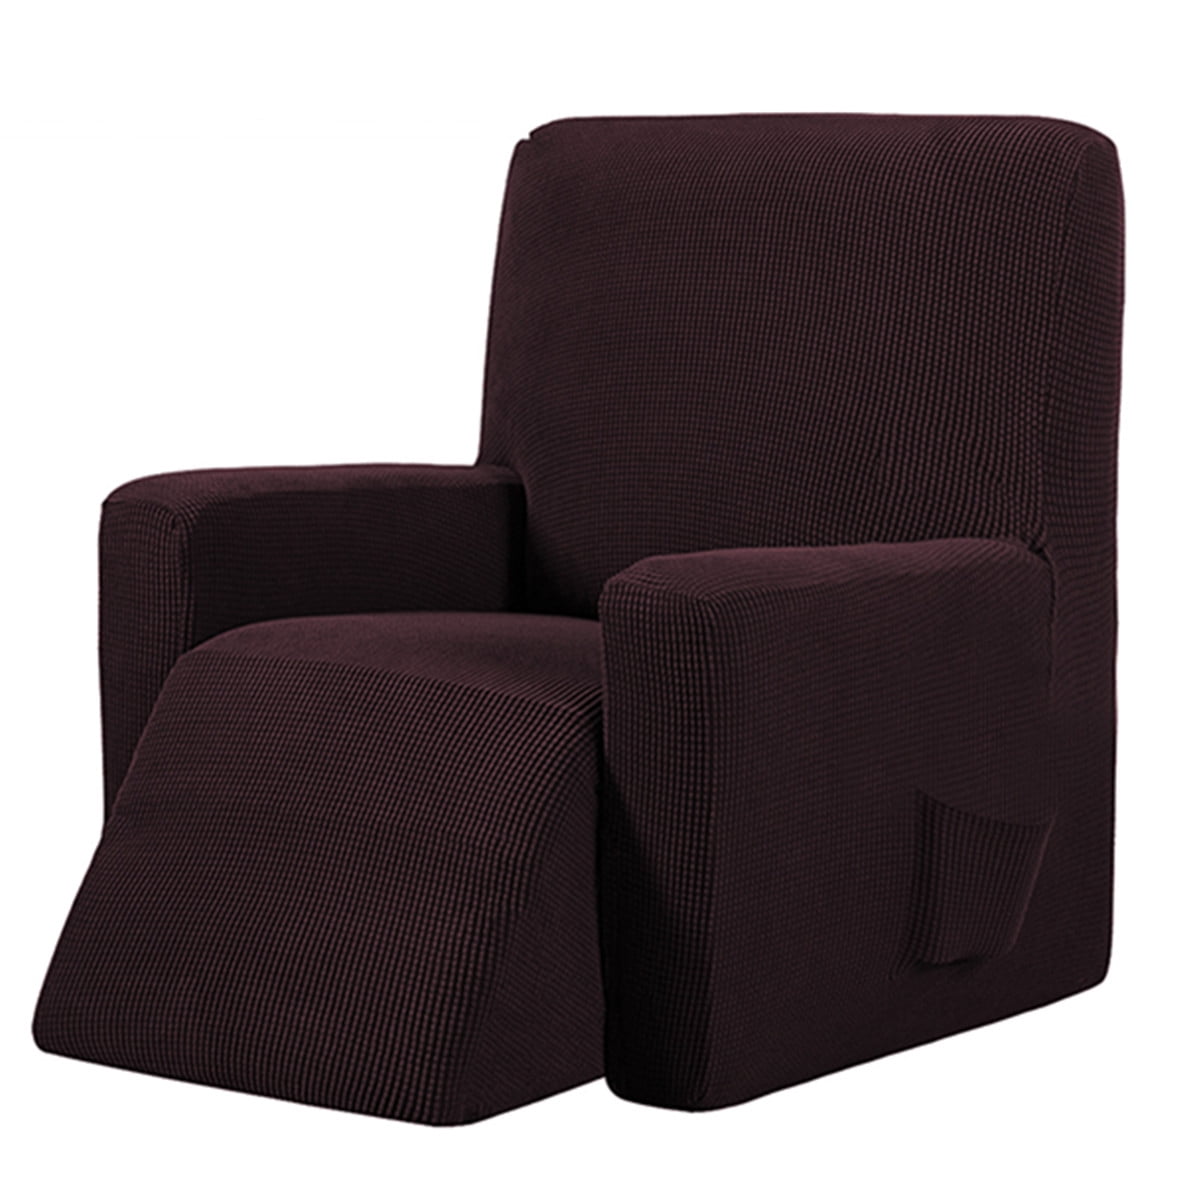 Recliner Chair Cover 1-Piece Recliner Covers for Large Recliner, Soft